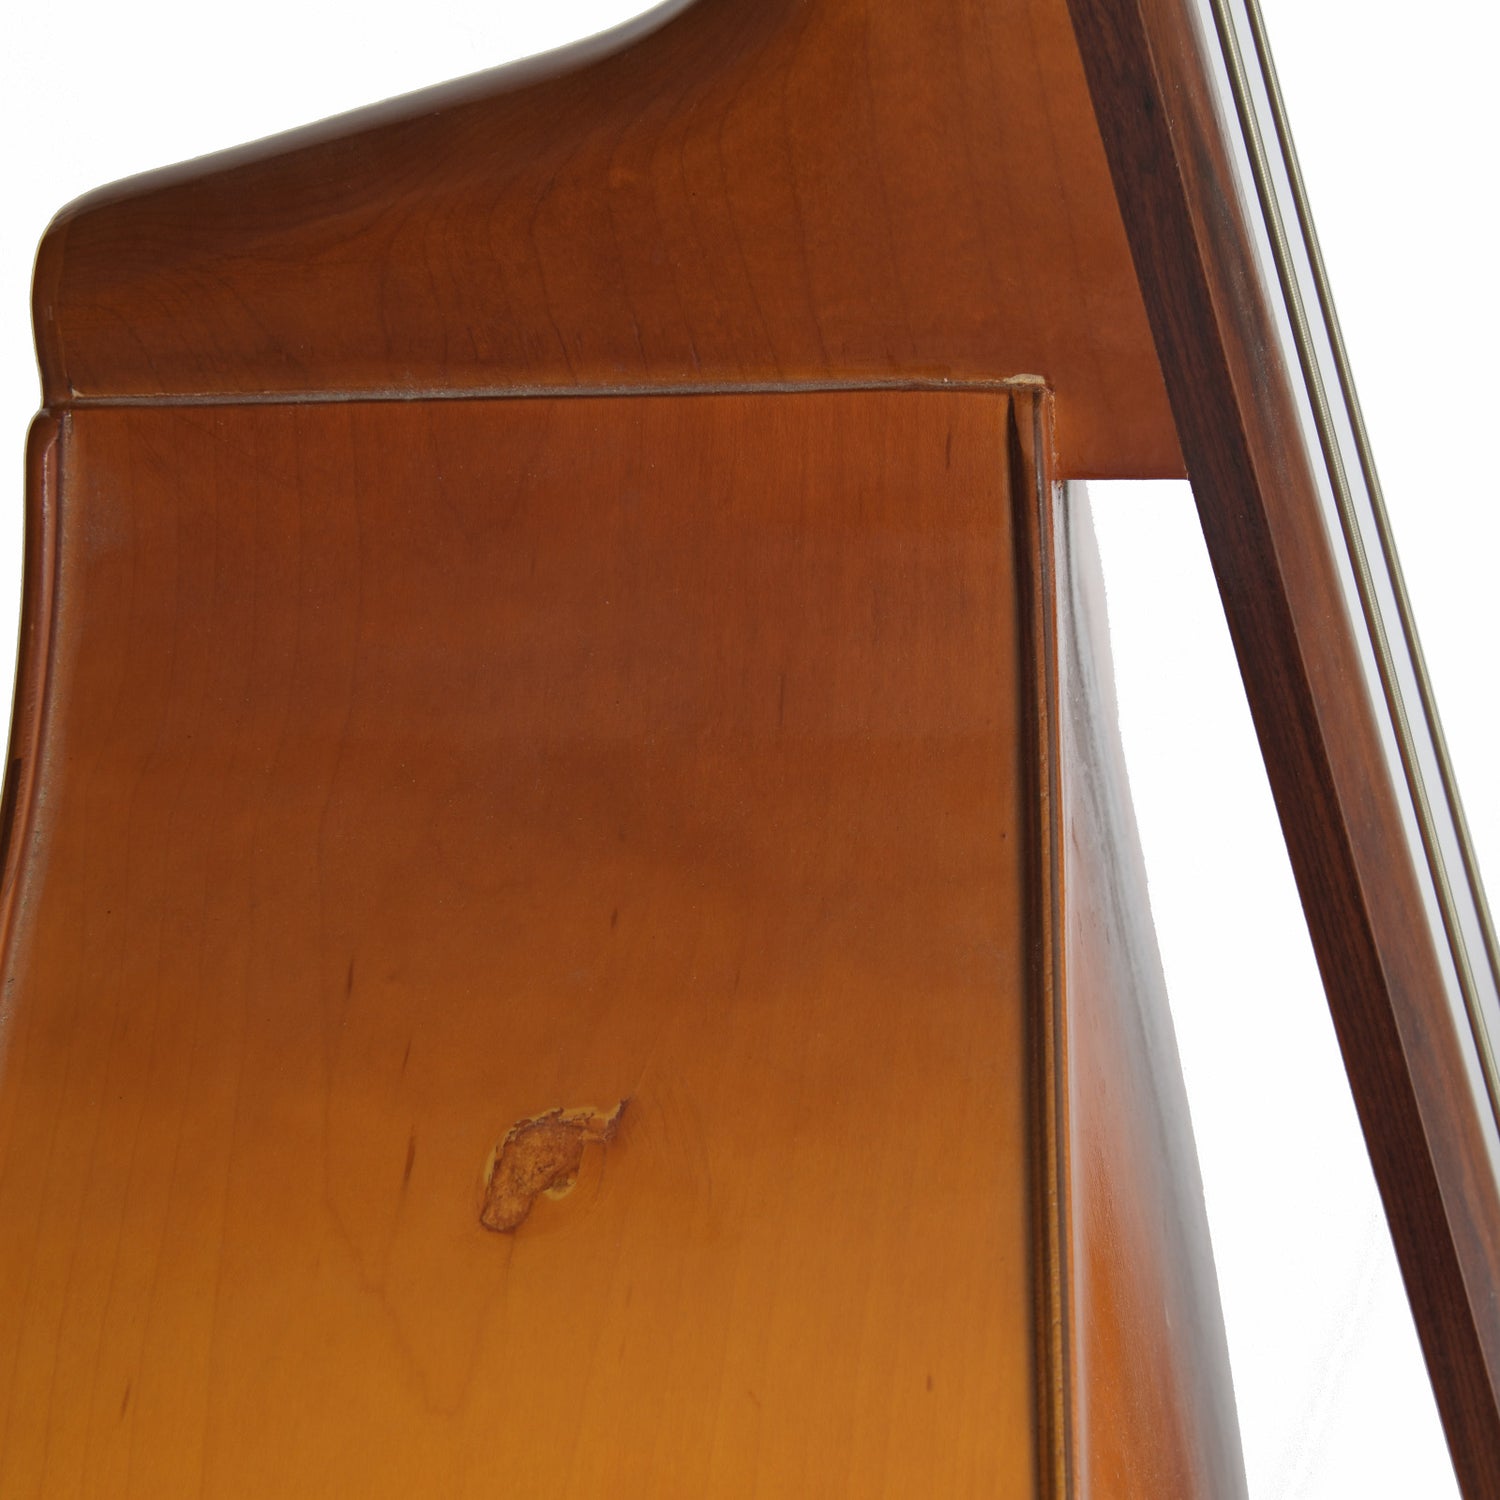 Repair on side of Englehardt M-1 3/4 Upright Bass